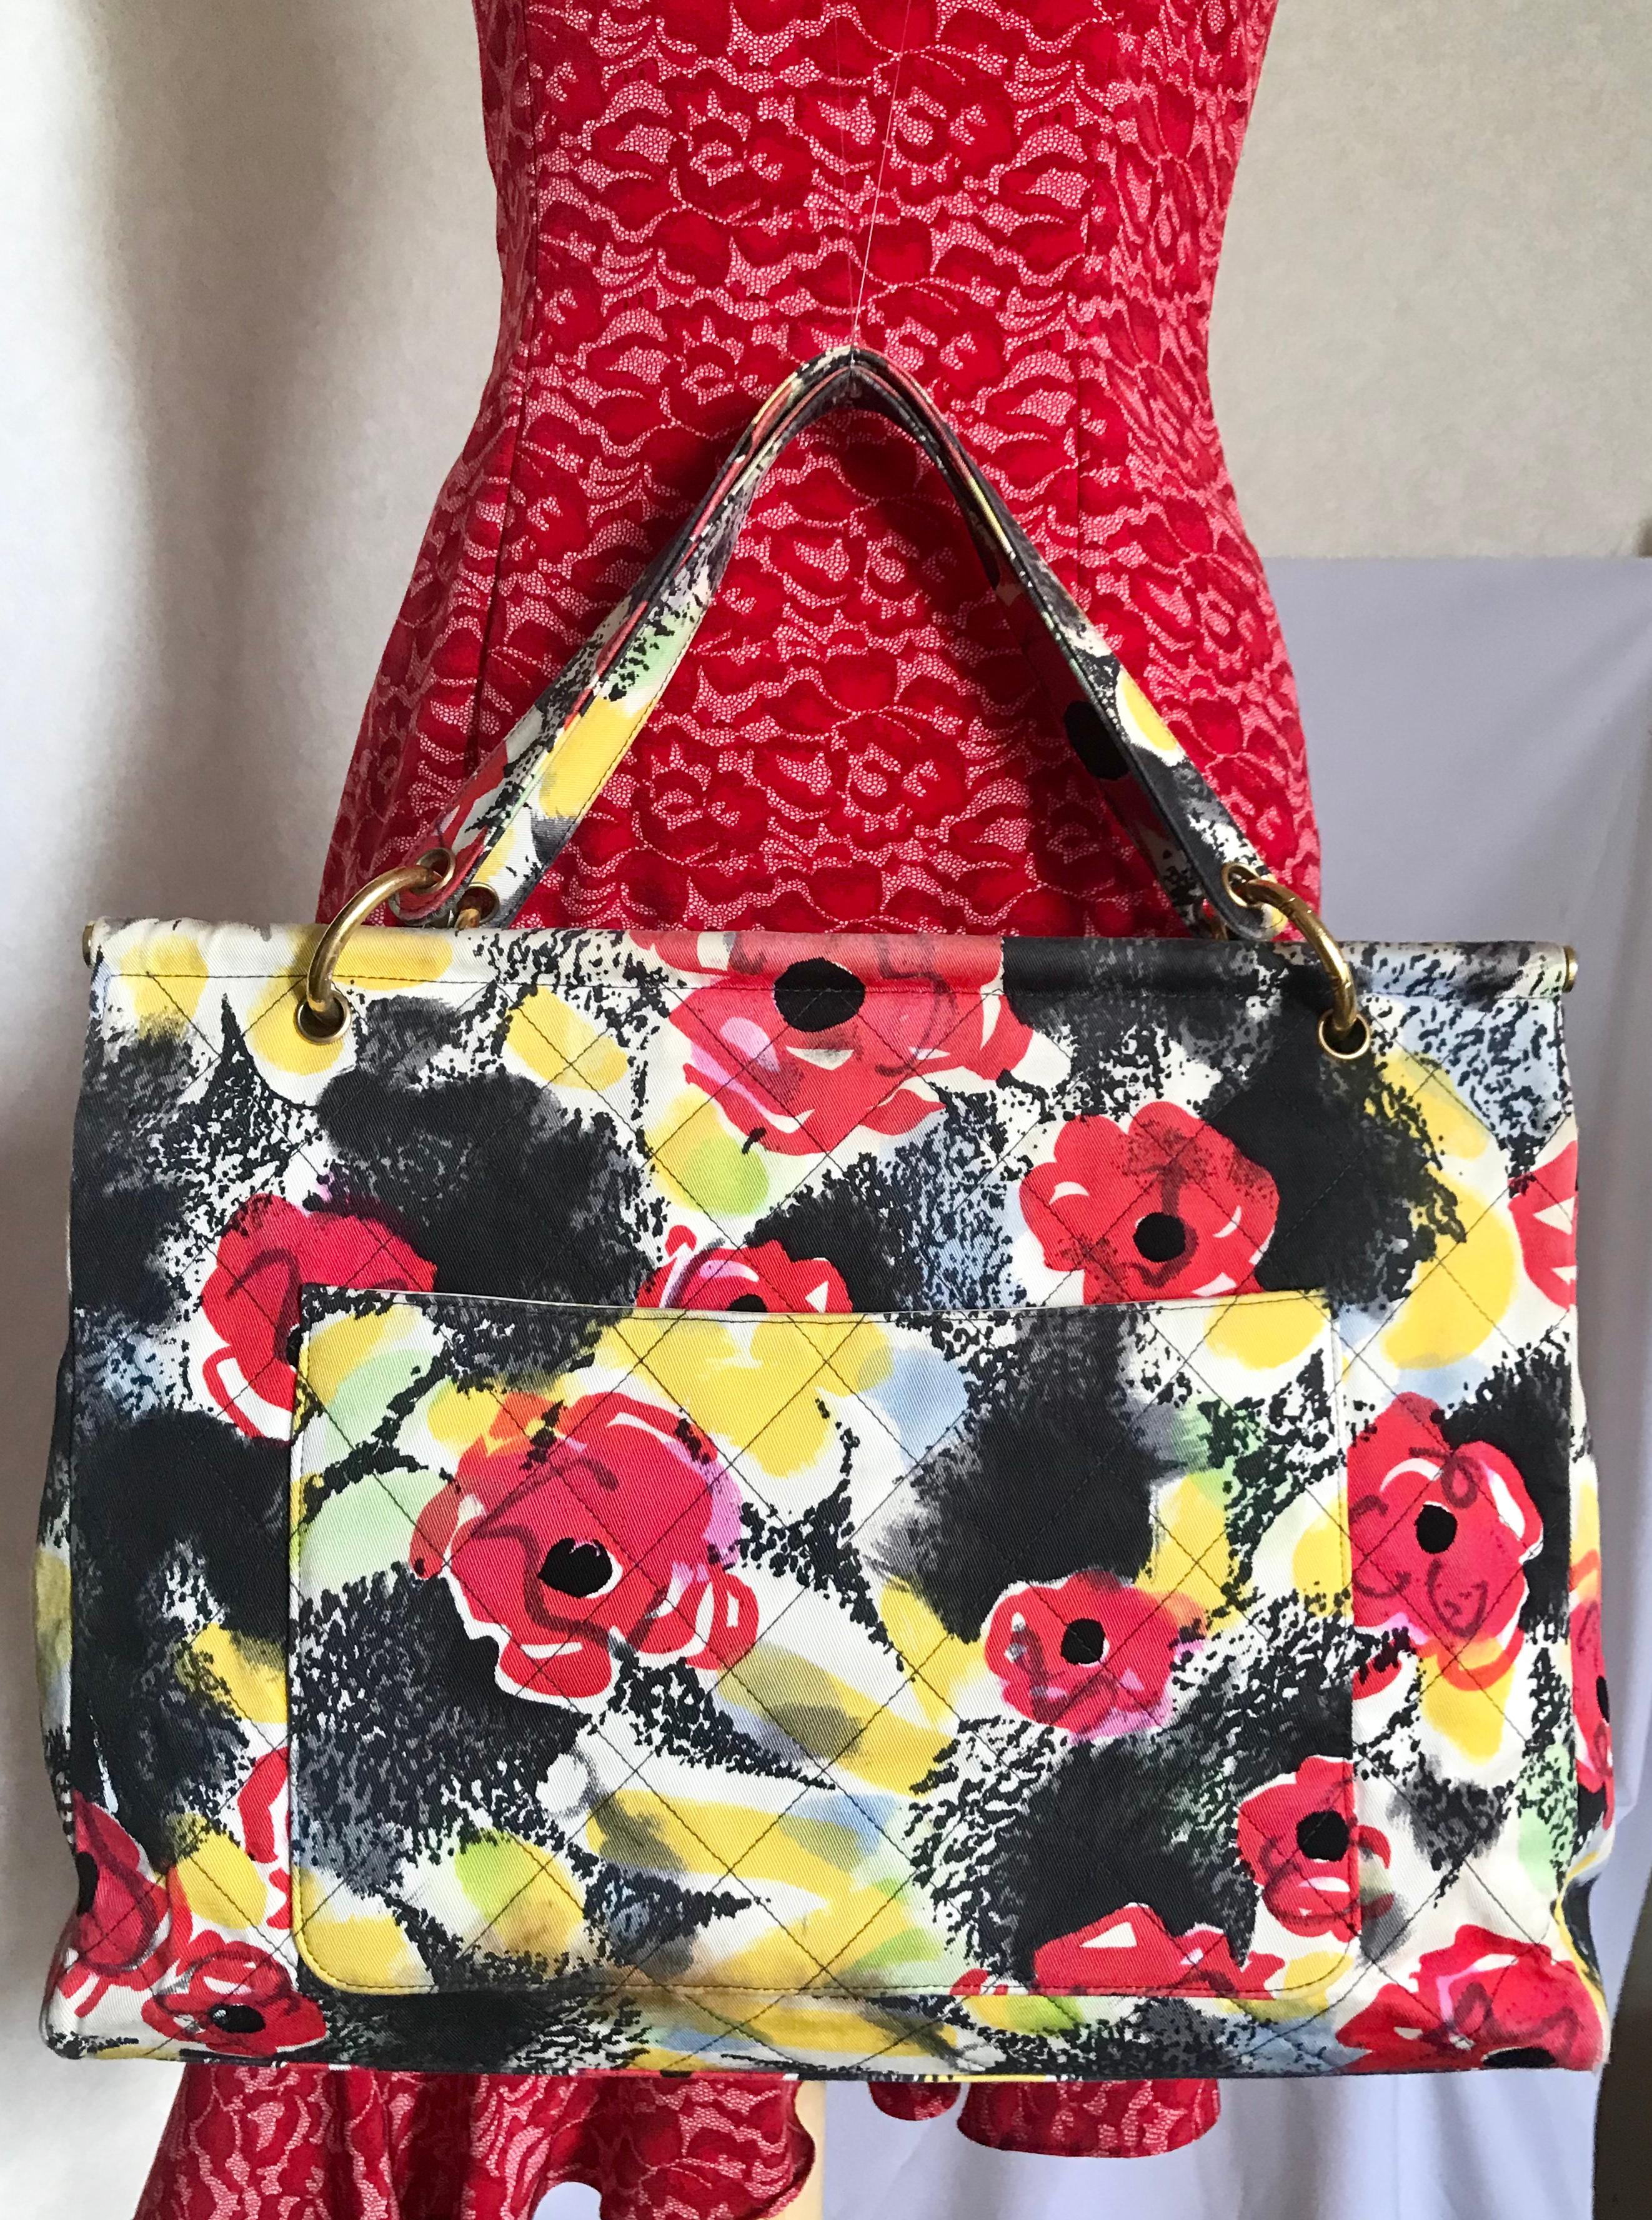 1990s. Vintage CHANEL red flower, yellow, and black water color drawing print design fabric canvas large tote bag with black enamel CC mark. Rare masterpiece back in the 90’s.

Introducing one of the rarest vintage CHANEL bags back in the